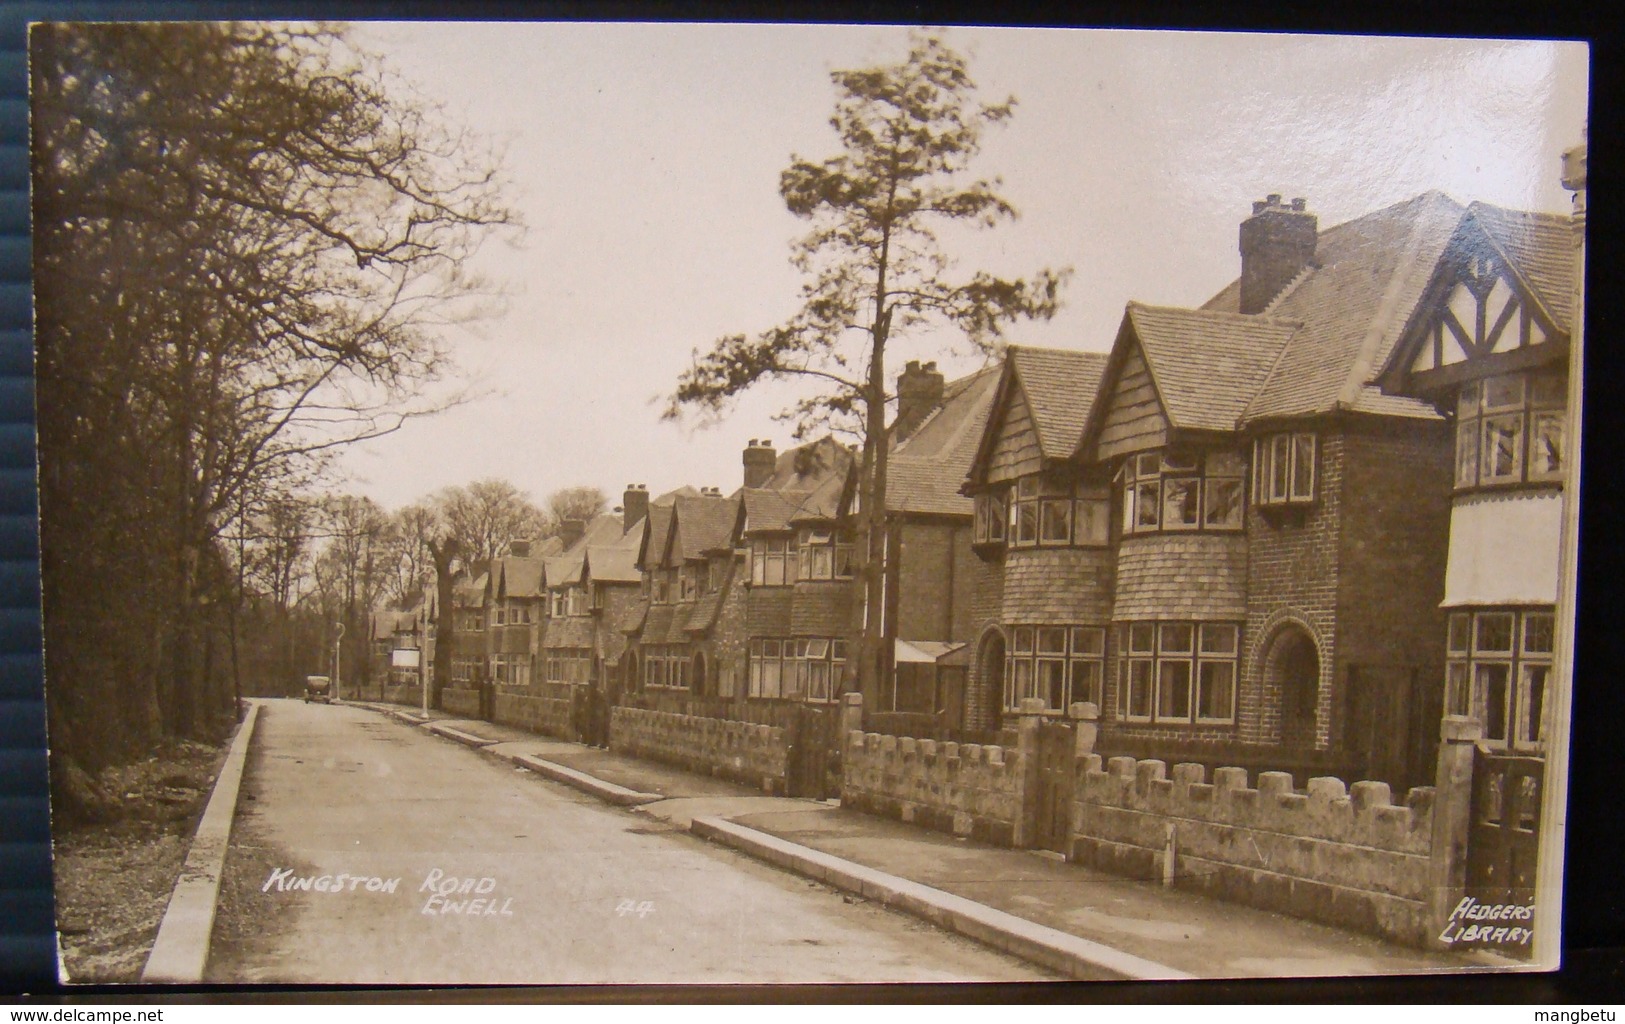 CP Ewell: Kingston Road. Hedgers Library - Surrey